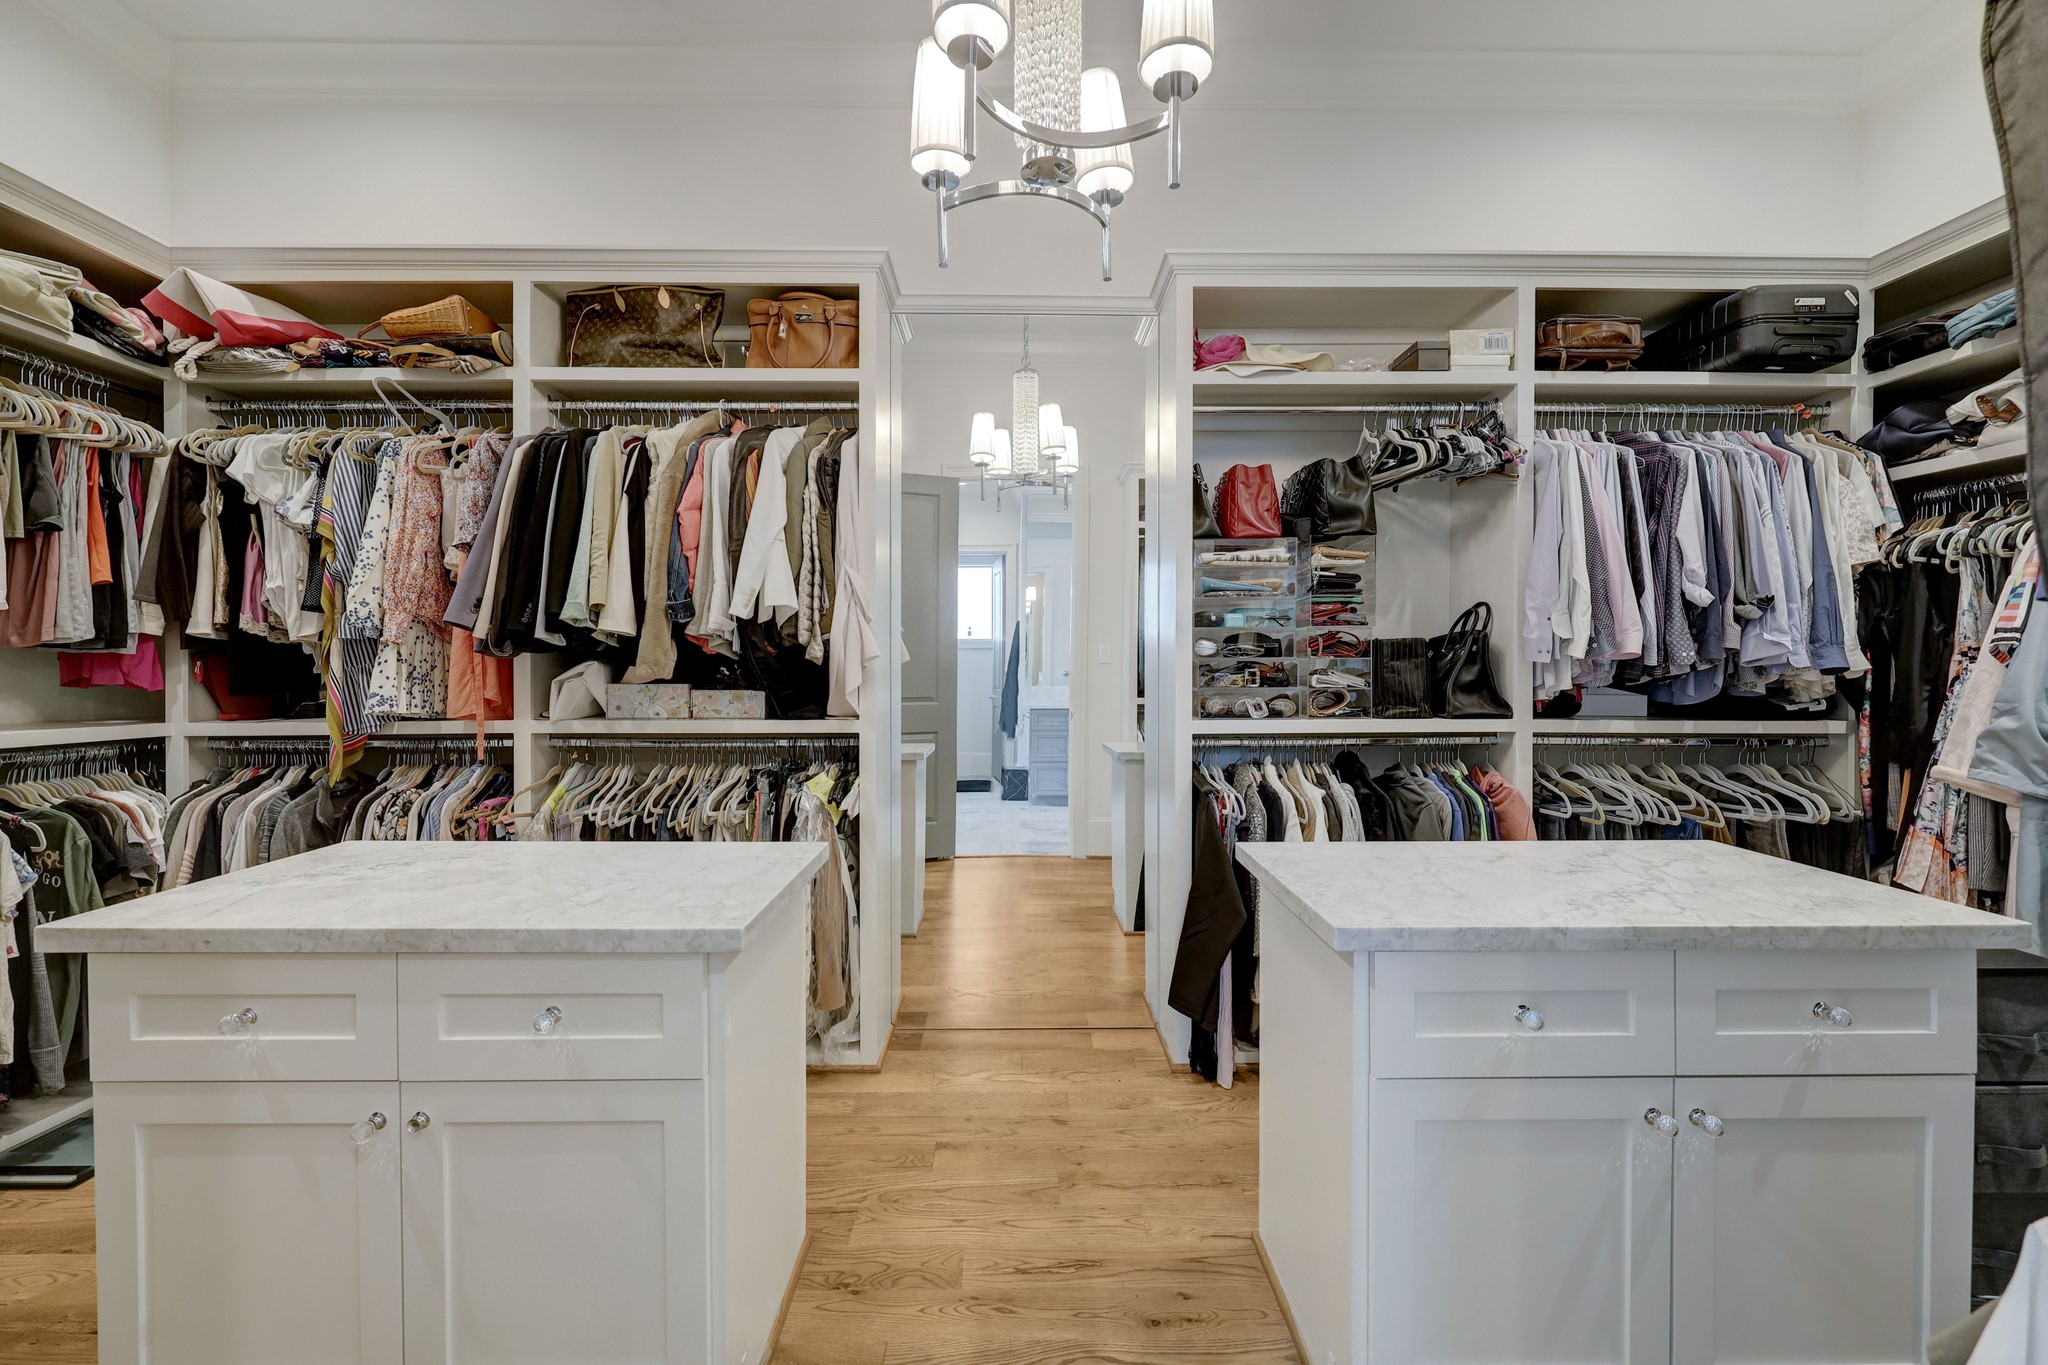 The primary closet features dual islands with built-in storage, several clothing rods, and built-in shelving.